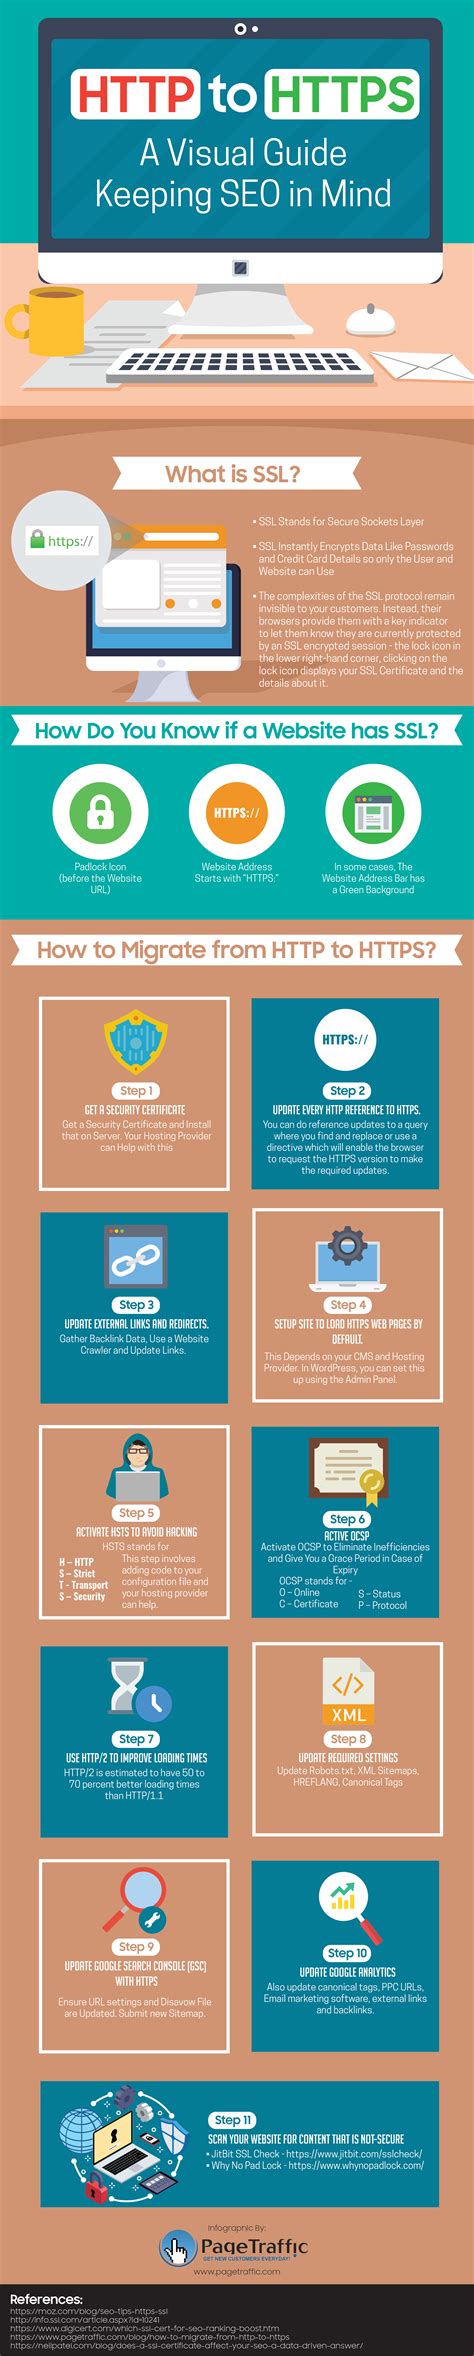 HTTP to HTTPS: A Visual Guide, Keeping SEO in Mind [Infographic ...